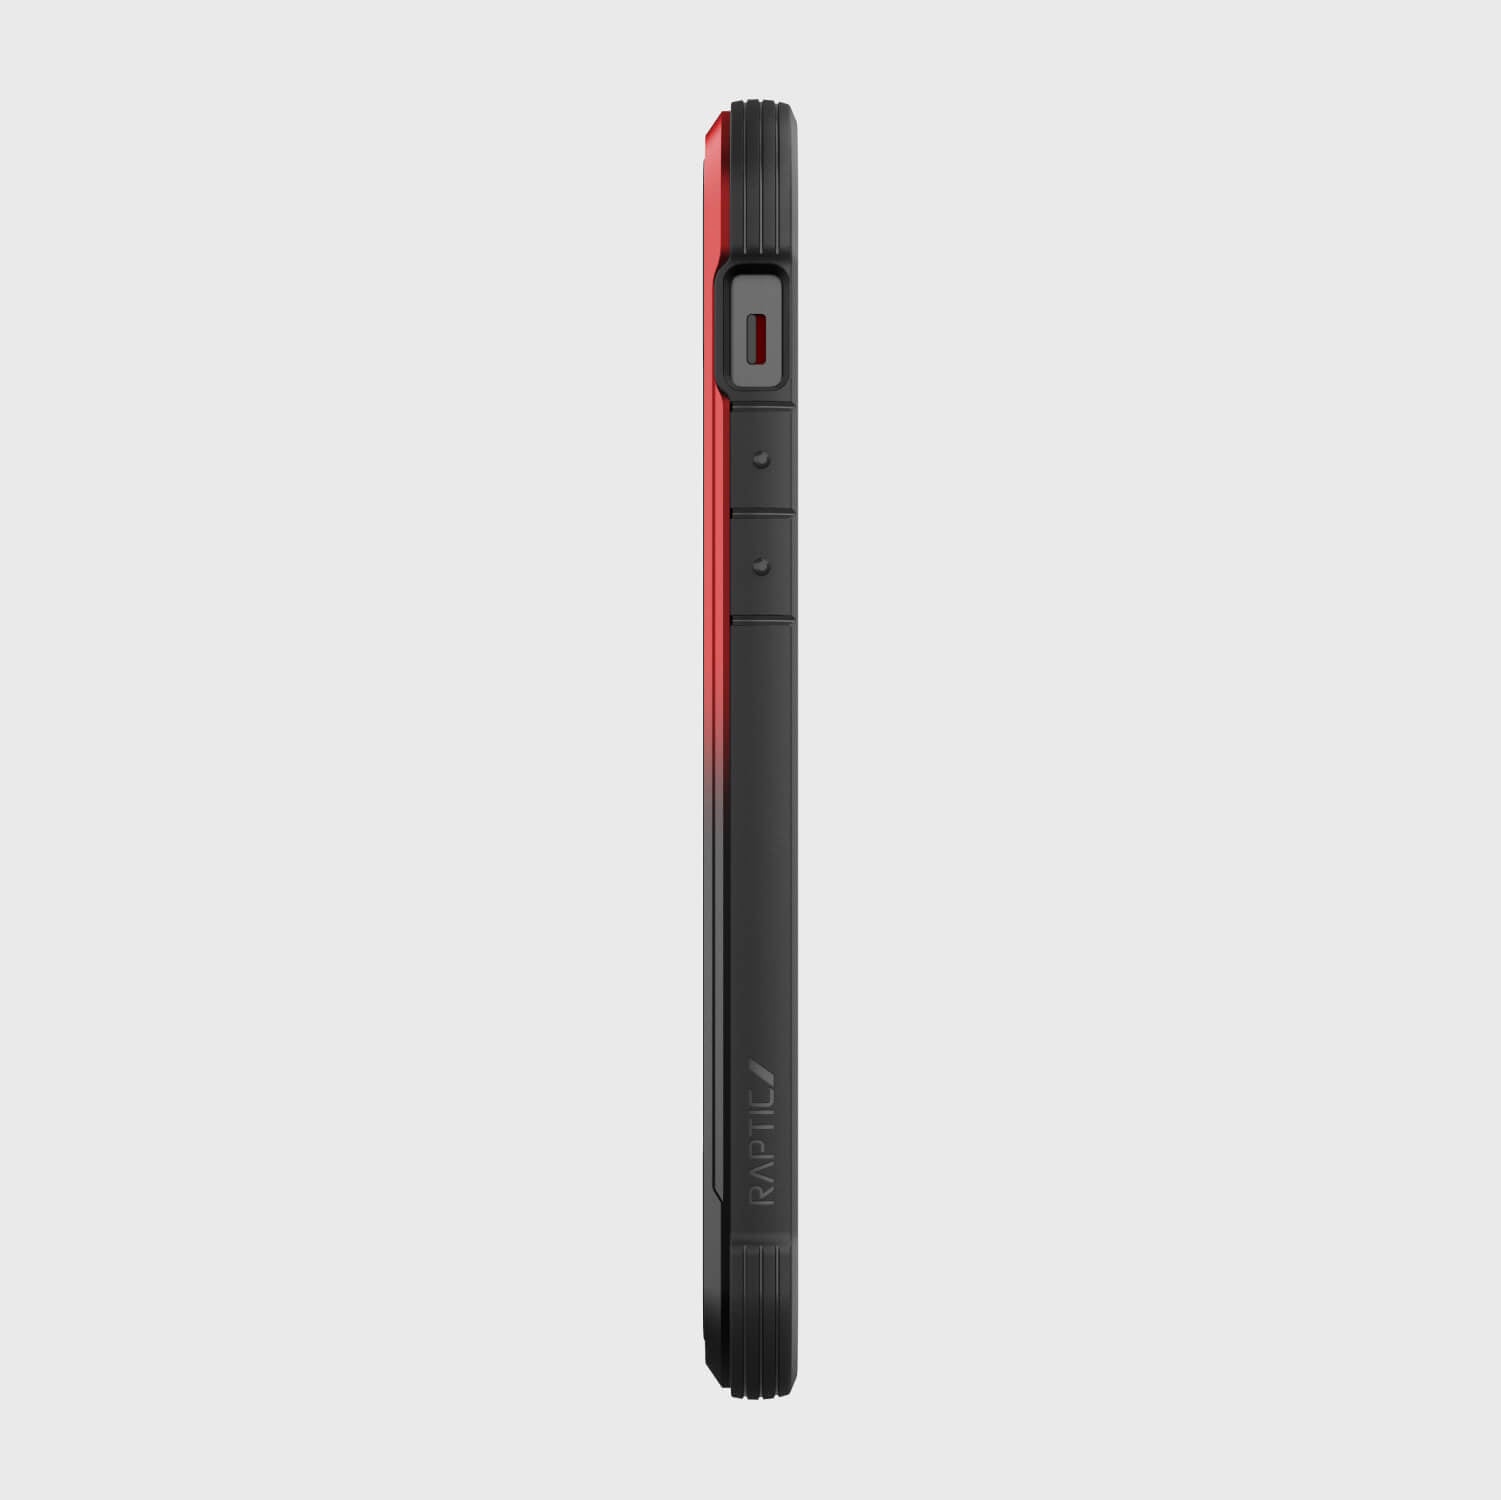 A Raptic iPhone 12 Pro phone case in black and red providing protection on a white background.